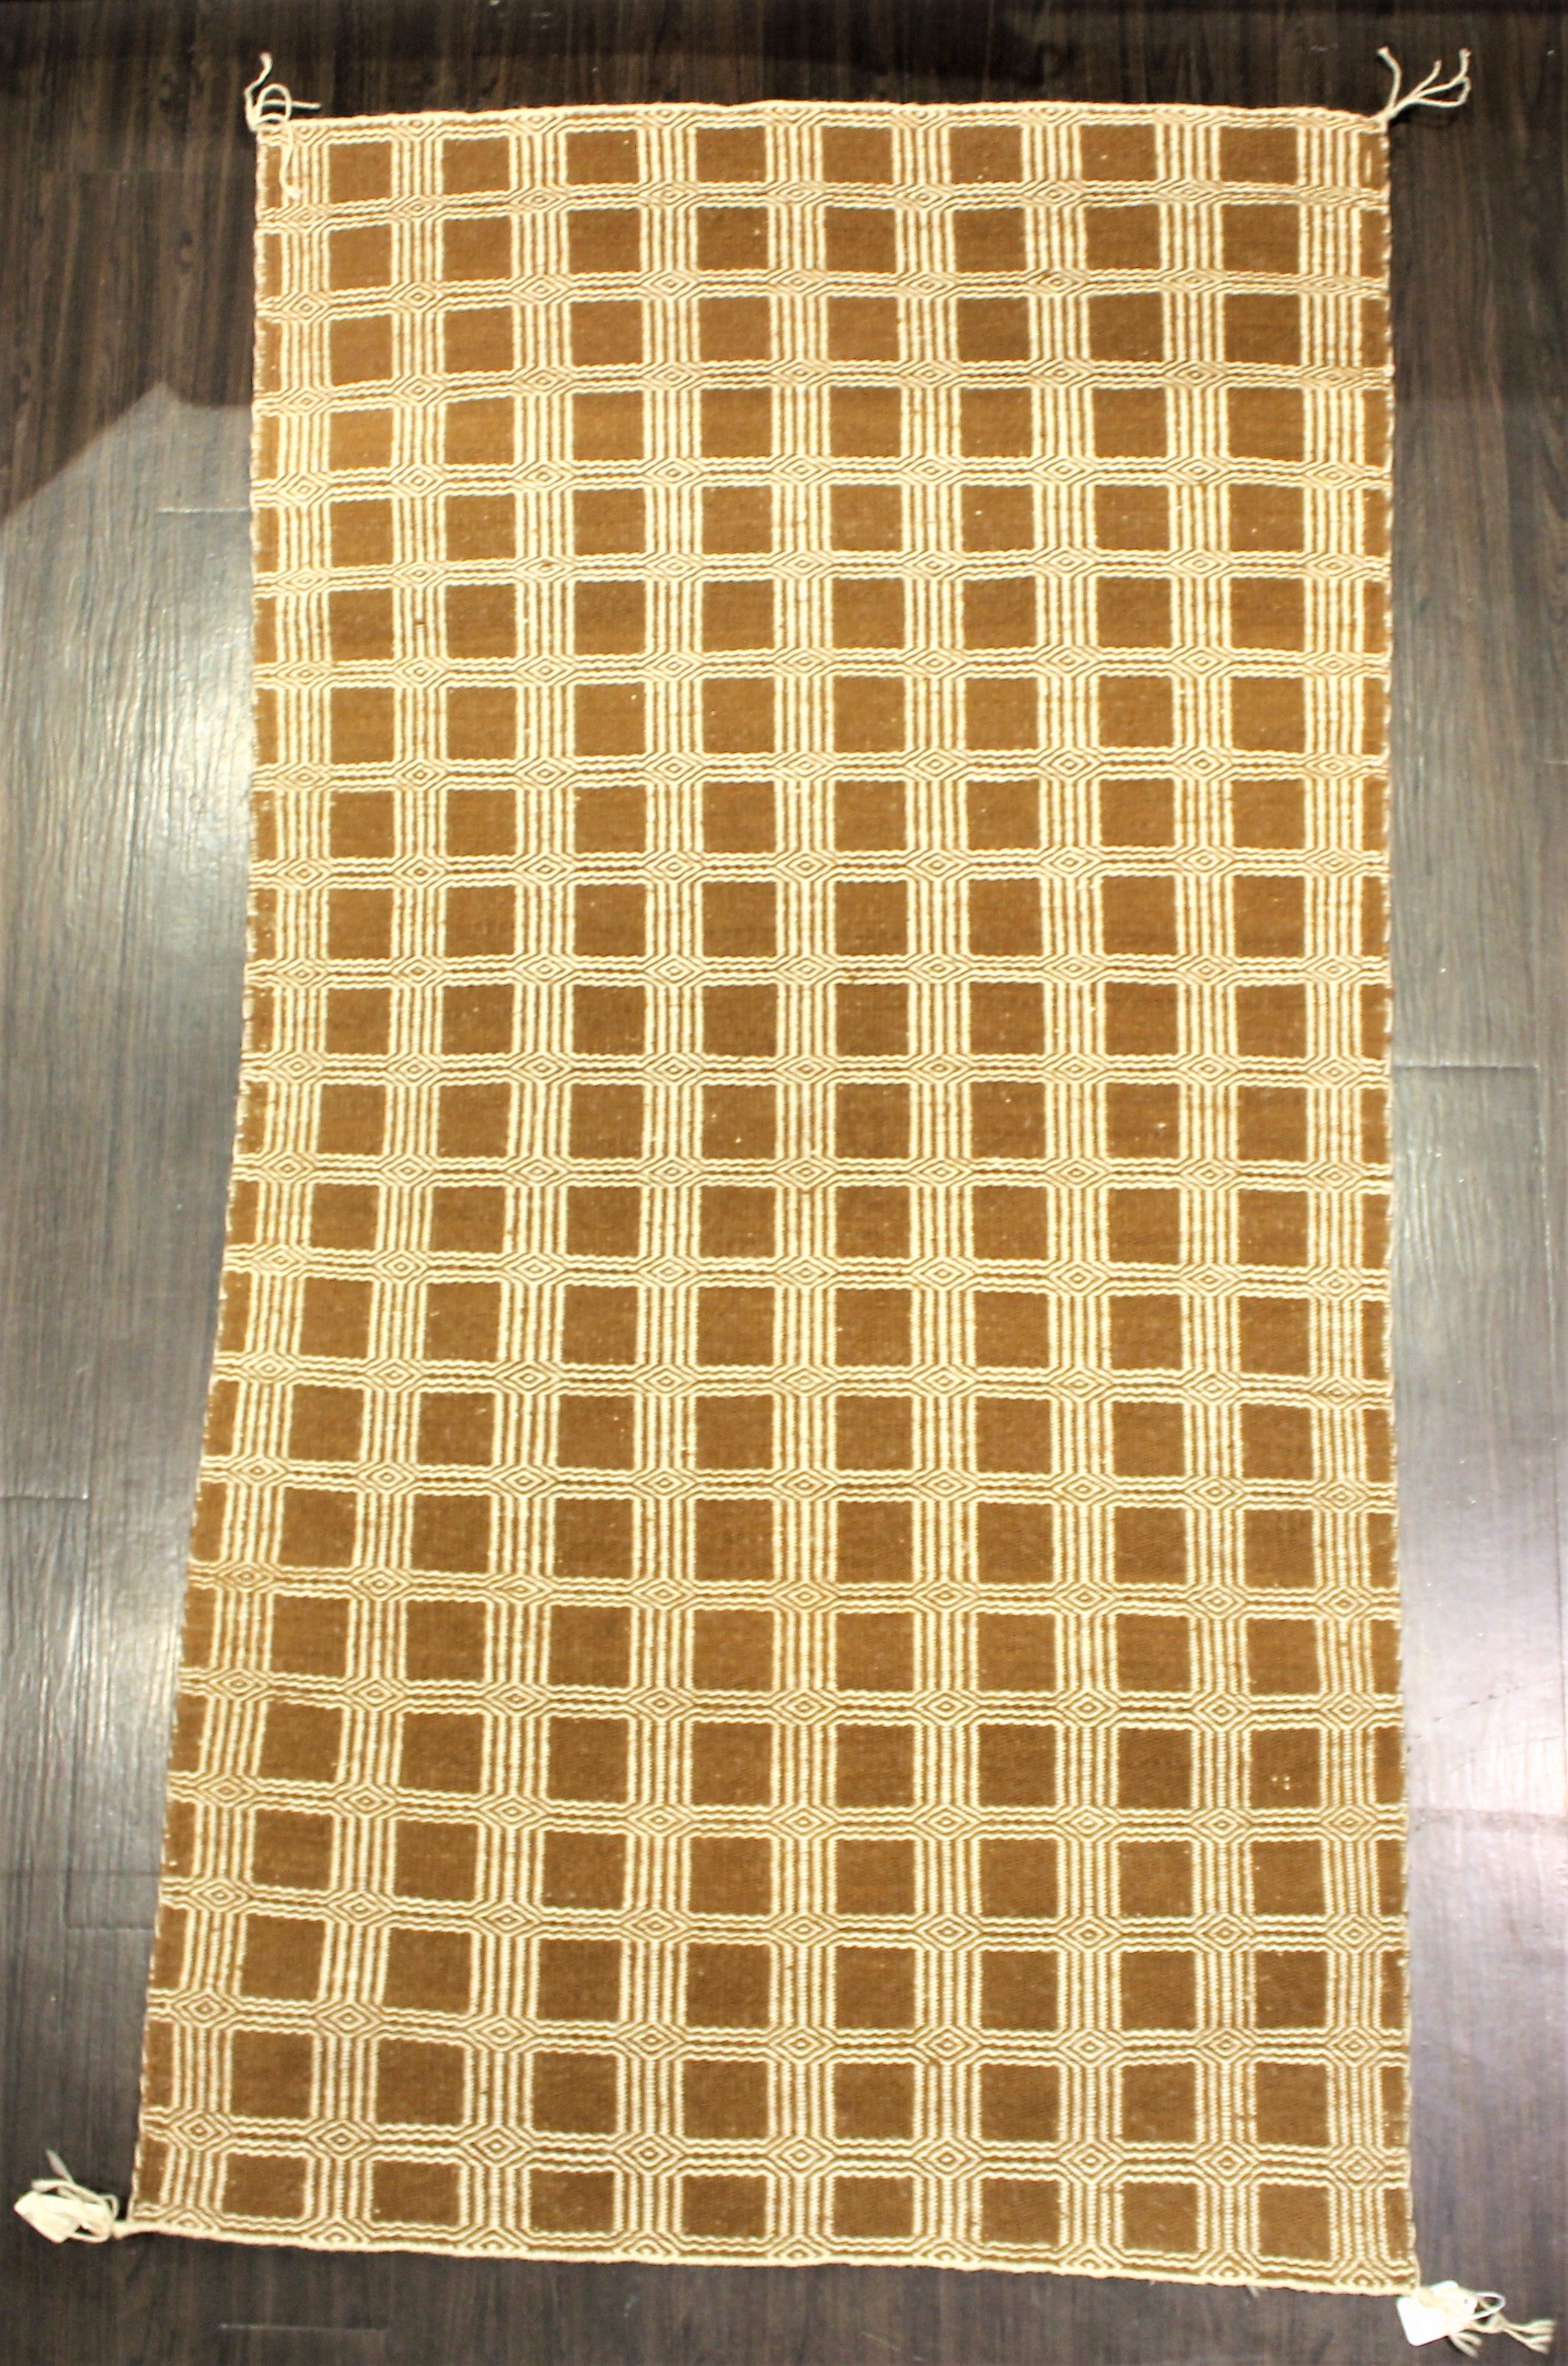 1970s Double Weave Two Sided Navajo Rug